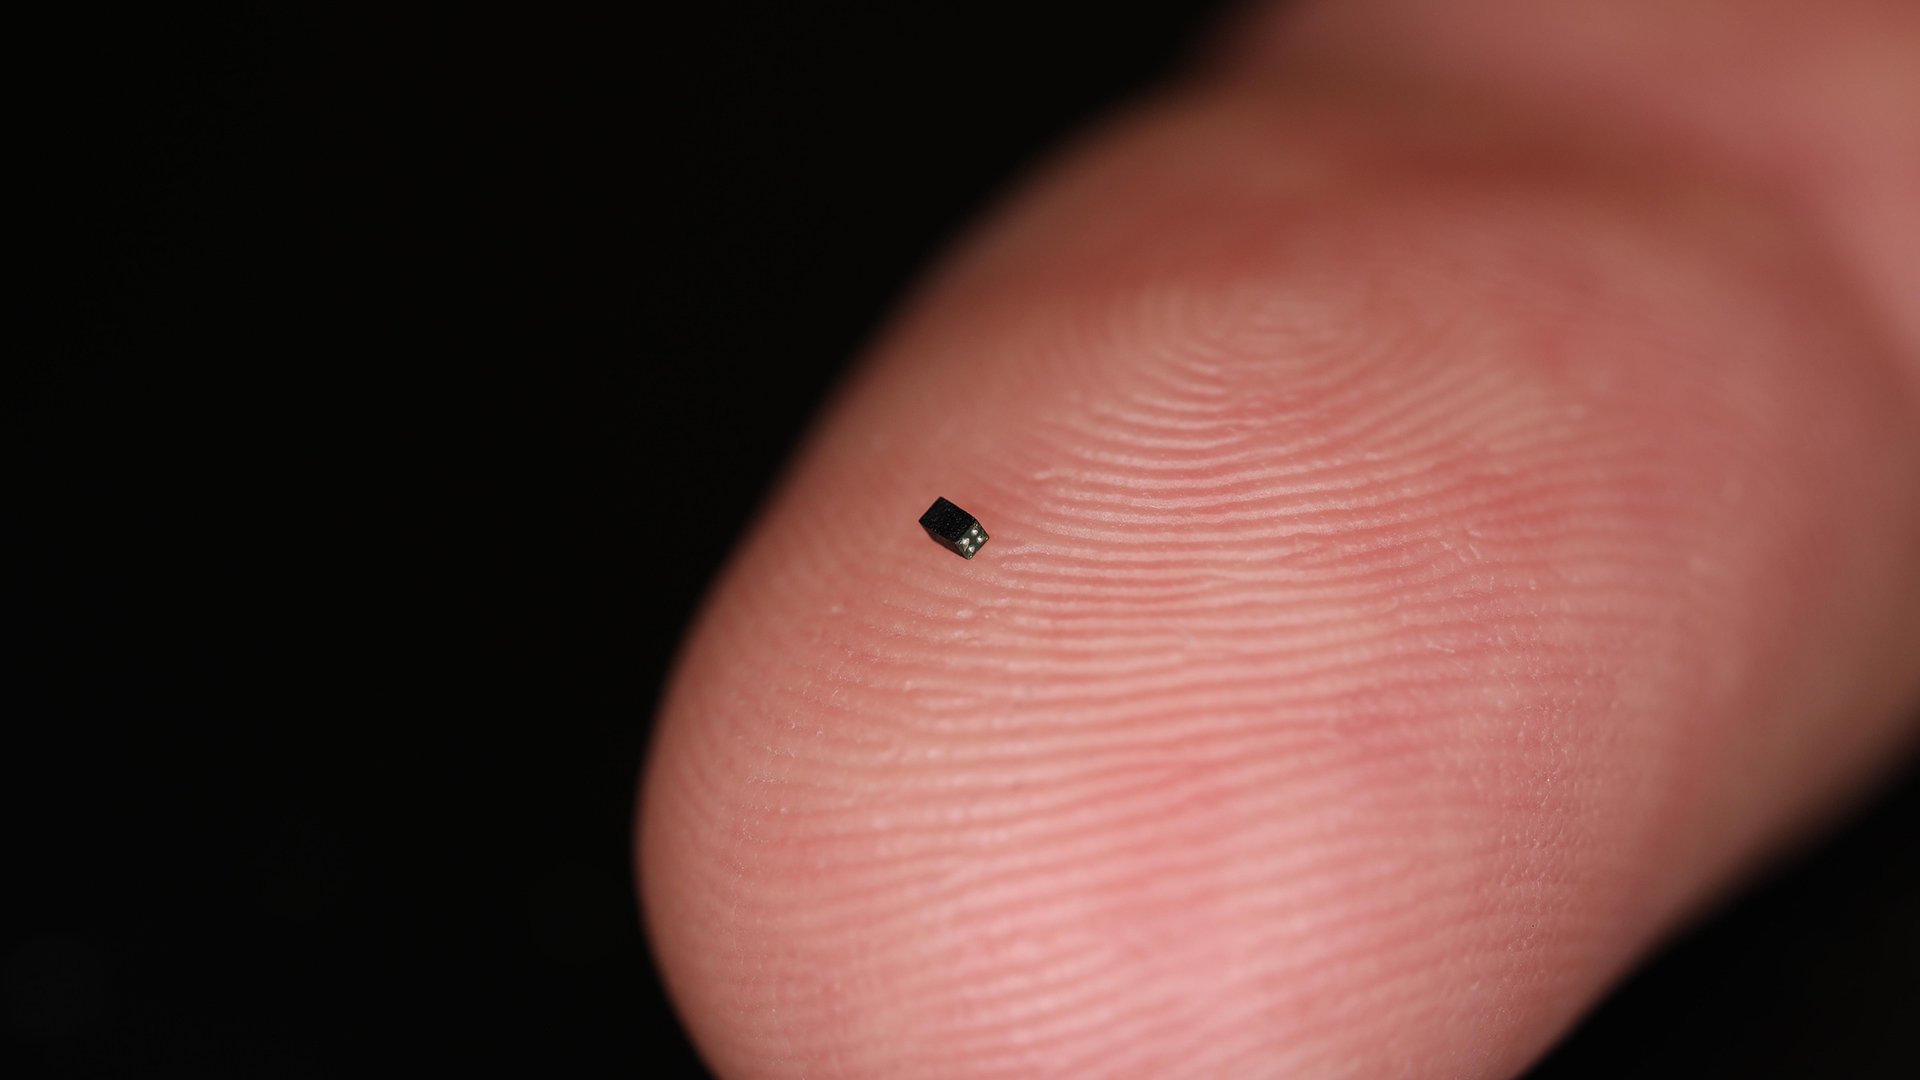 This is the world's smallest commercially available sensor, and it